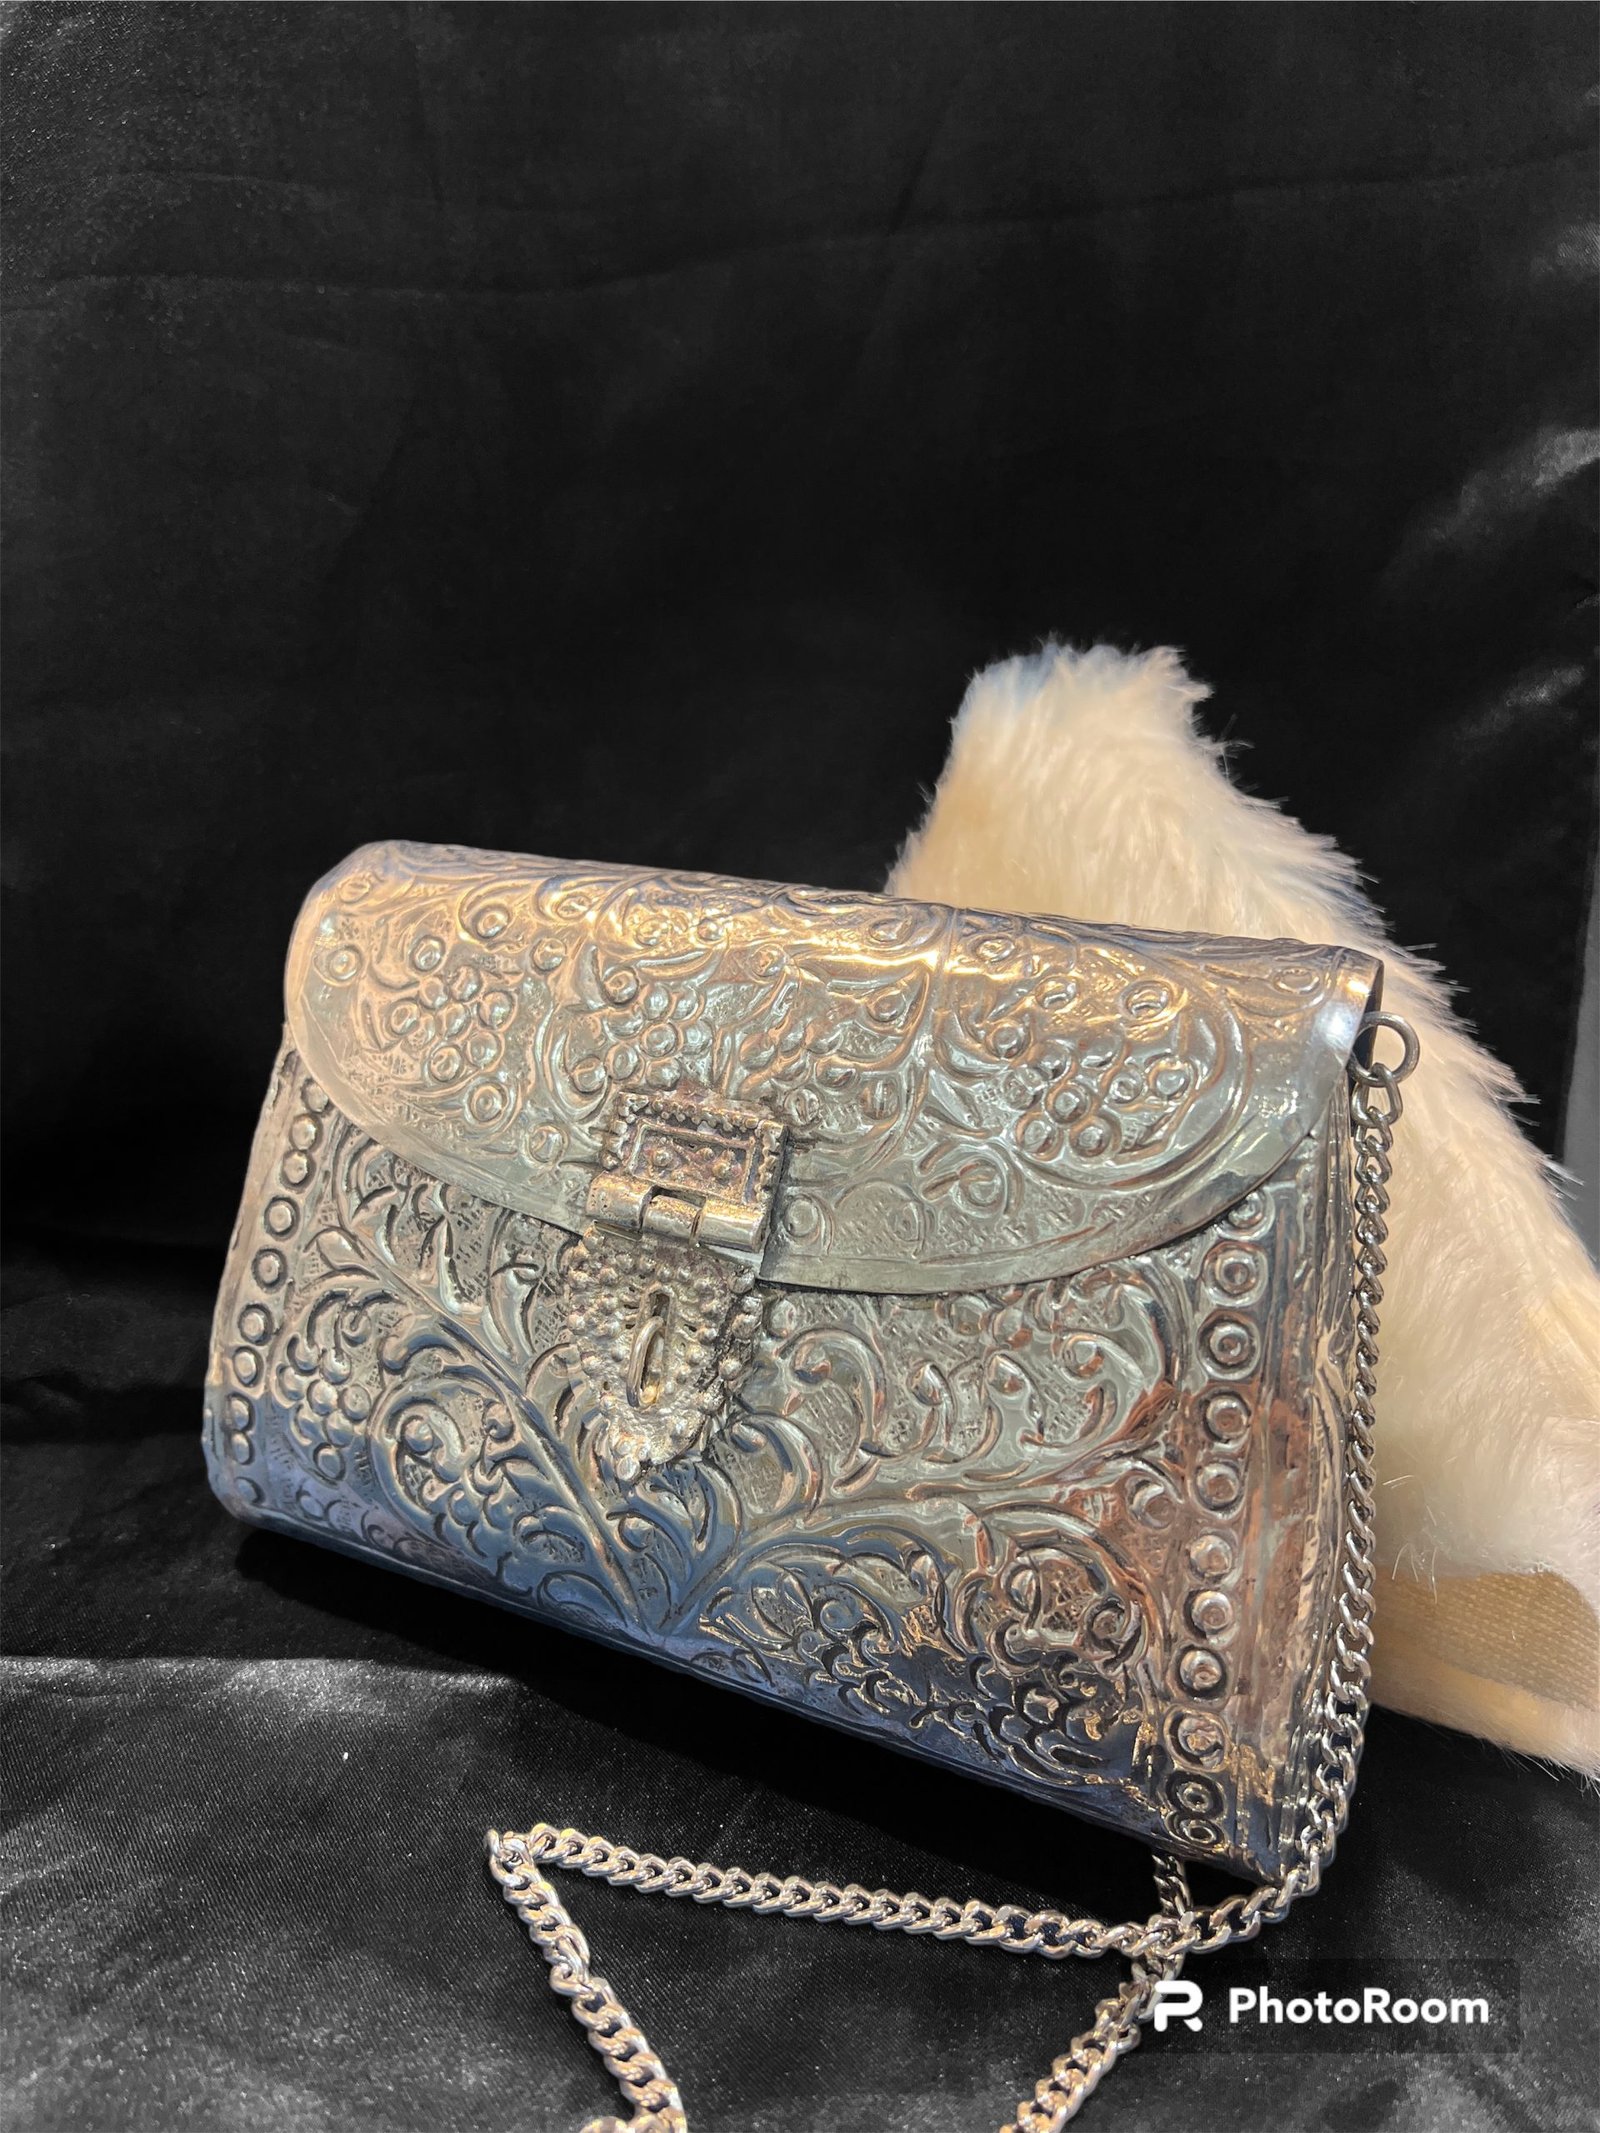 Buy German Silver Royal Purse Unique Metal Clutch Purse From the Indian  Craftsmen Handmade Hand Clutch Handmade Oxidised Woman Clutch Online in  India - Etsy